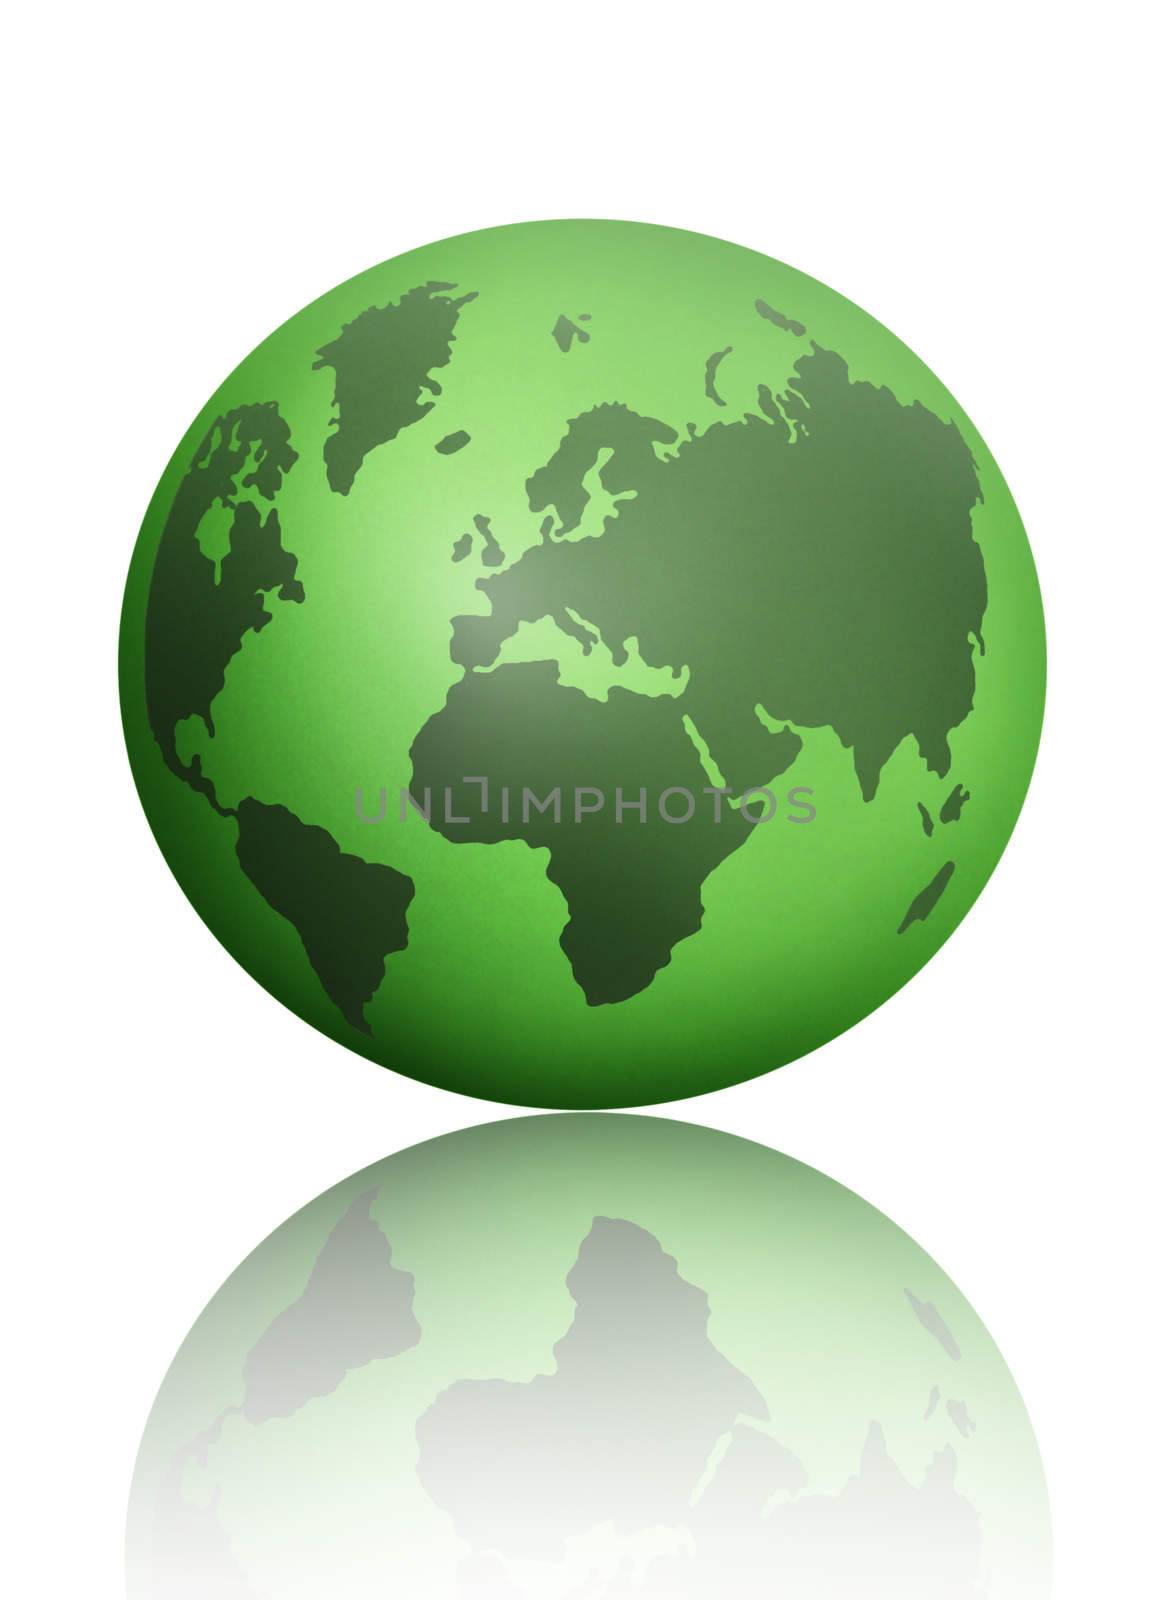 Green atlas globe map over a white background